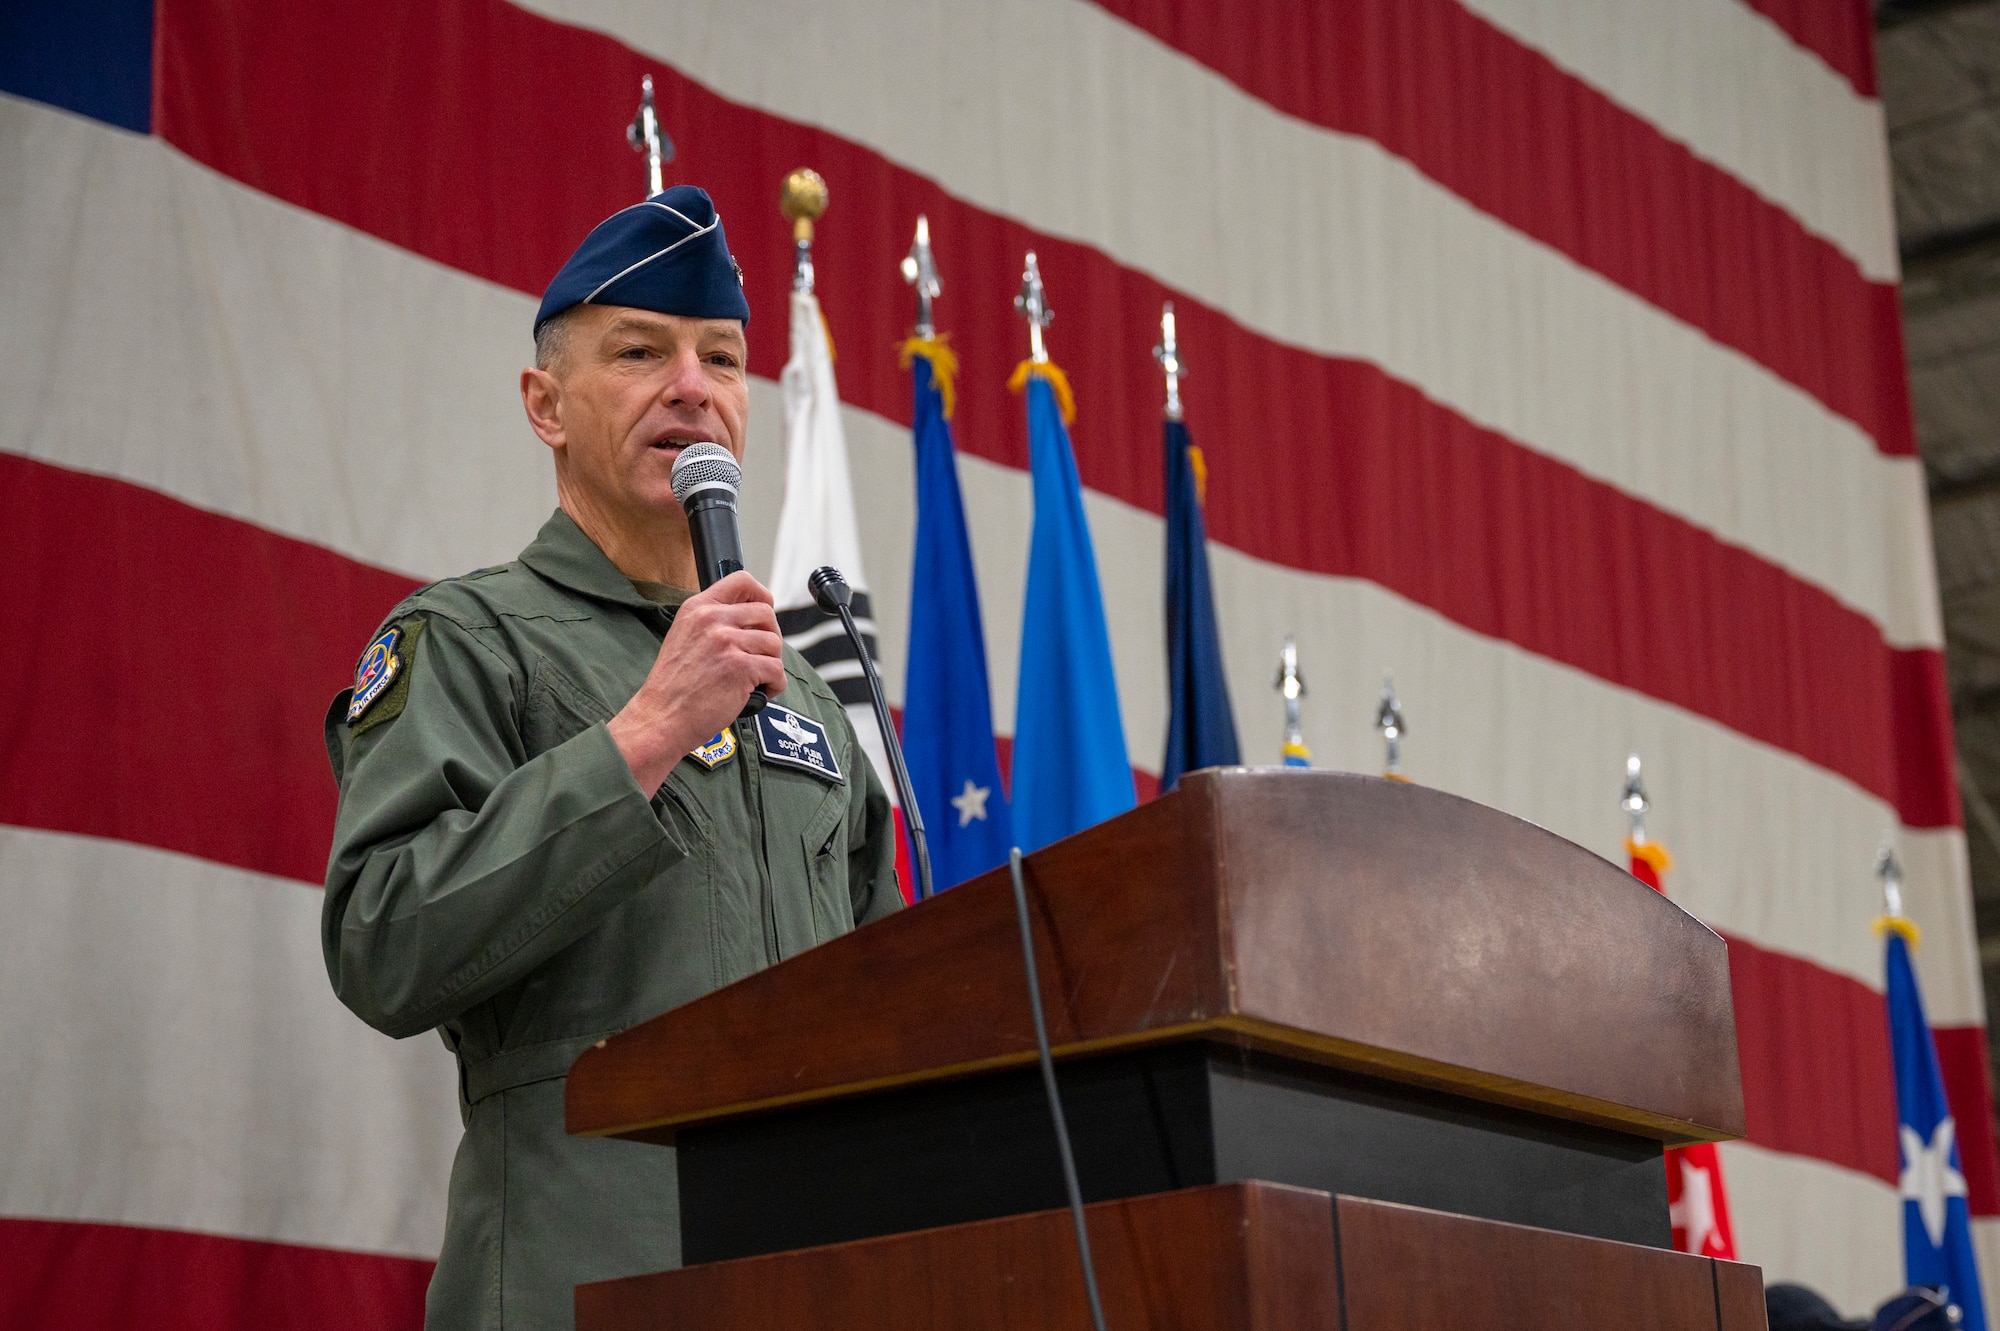 U.S. Air Force Lt. Gen. Scott Pleus, outgoing Seventh Air Force commander, speaks during the Seventh Air Force change of command ceremony behind a podium, in front of a large flag background.